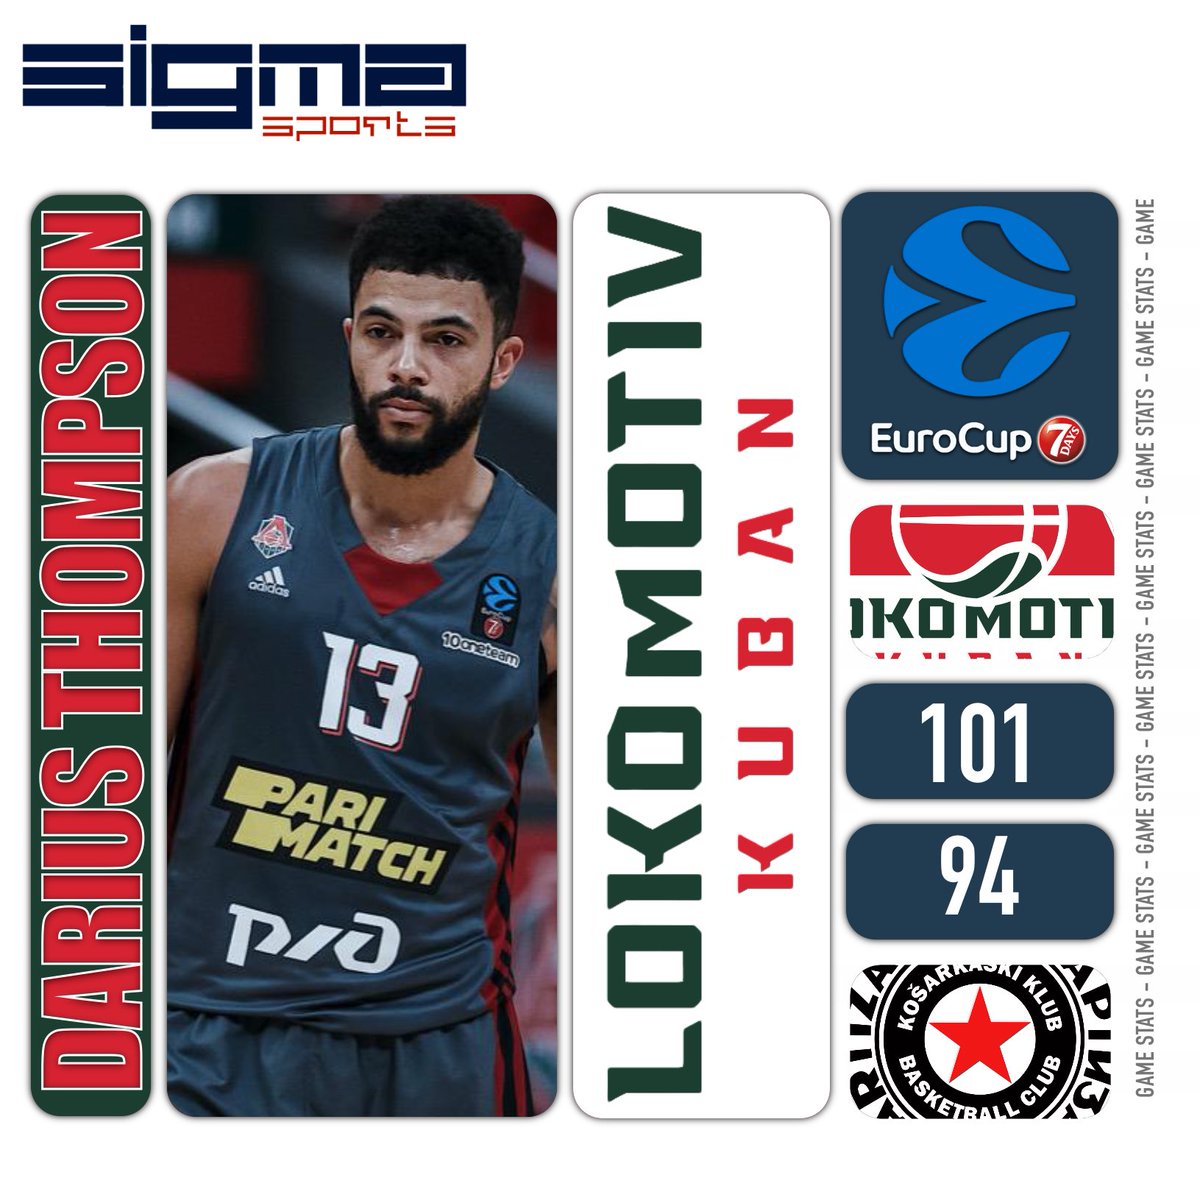 BIG @EuroCup W for @lokobasket ‼️ Almost a TRIPLE DOUBLE for @dthomp15 with 10pts, 9reb, 11ast, 2stl and 28 of PIR 💪🏾🇺🇸 #SigmaSports #DreamBIG #Darius #Thompson #Eurocup #LokoBasket